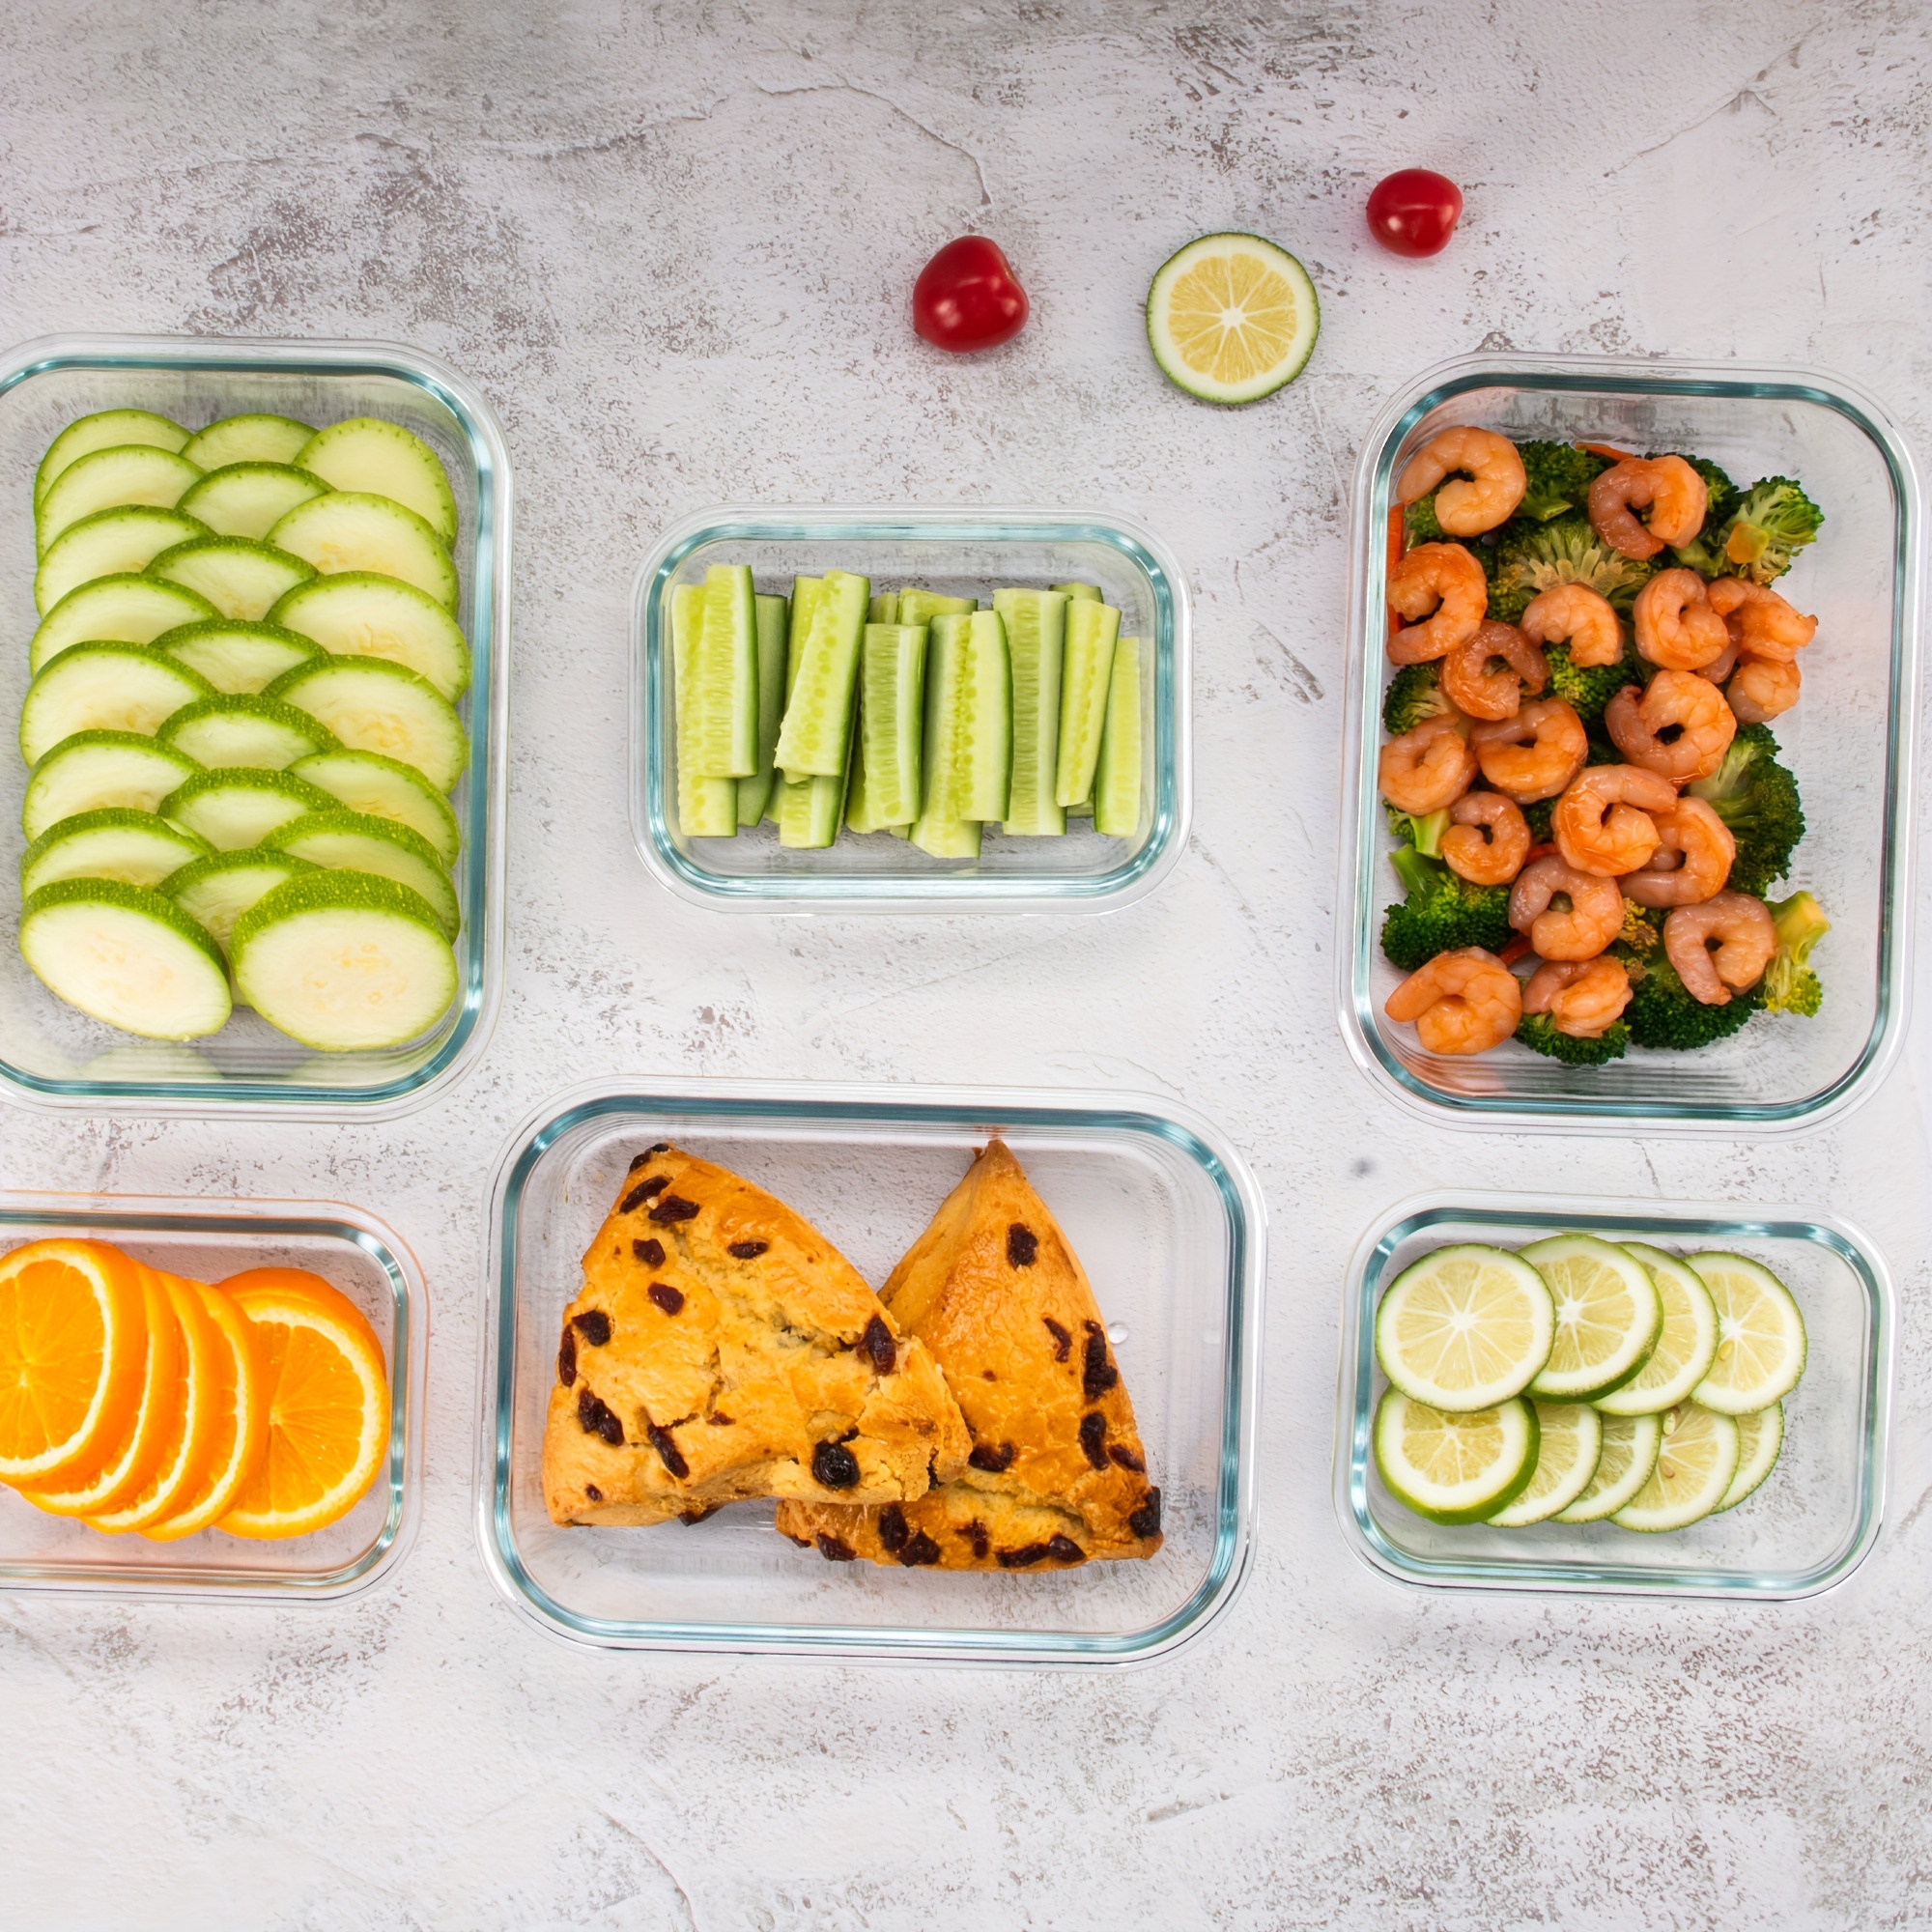 Best Portion Control Containers